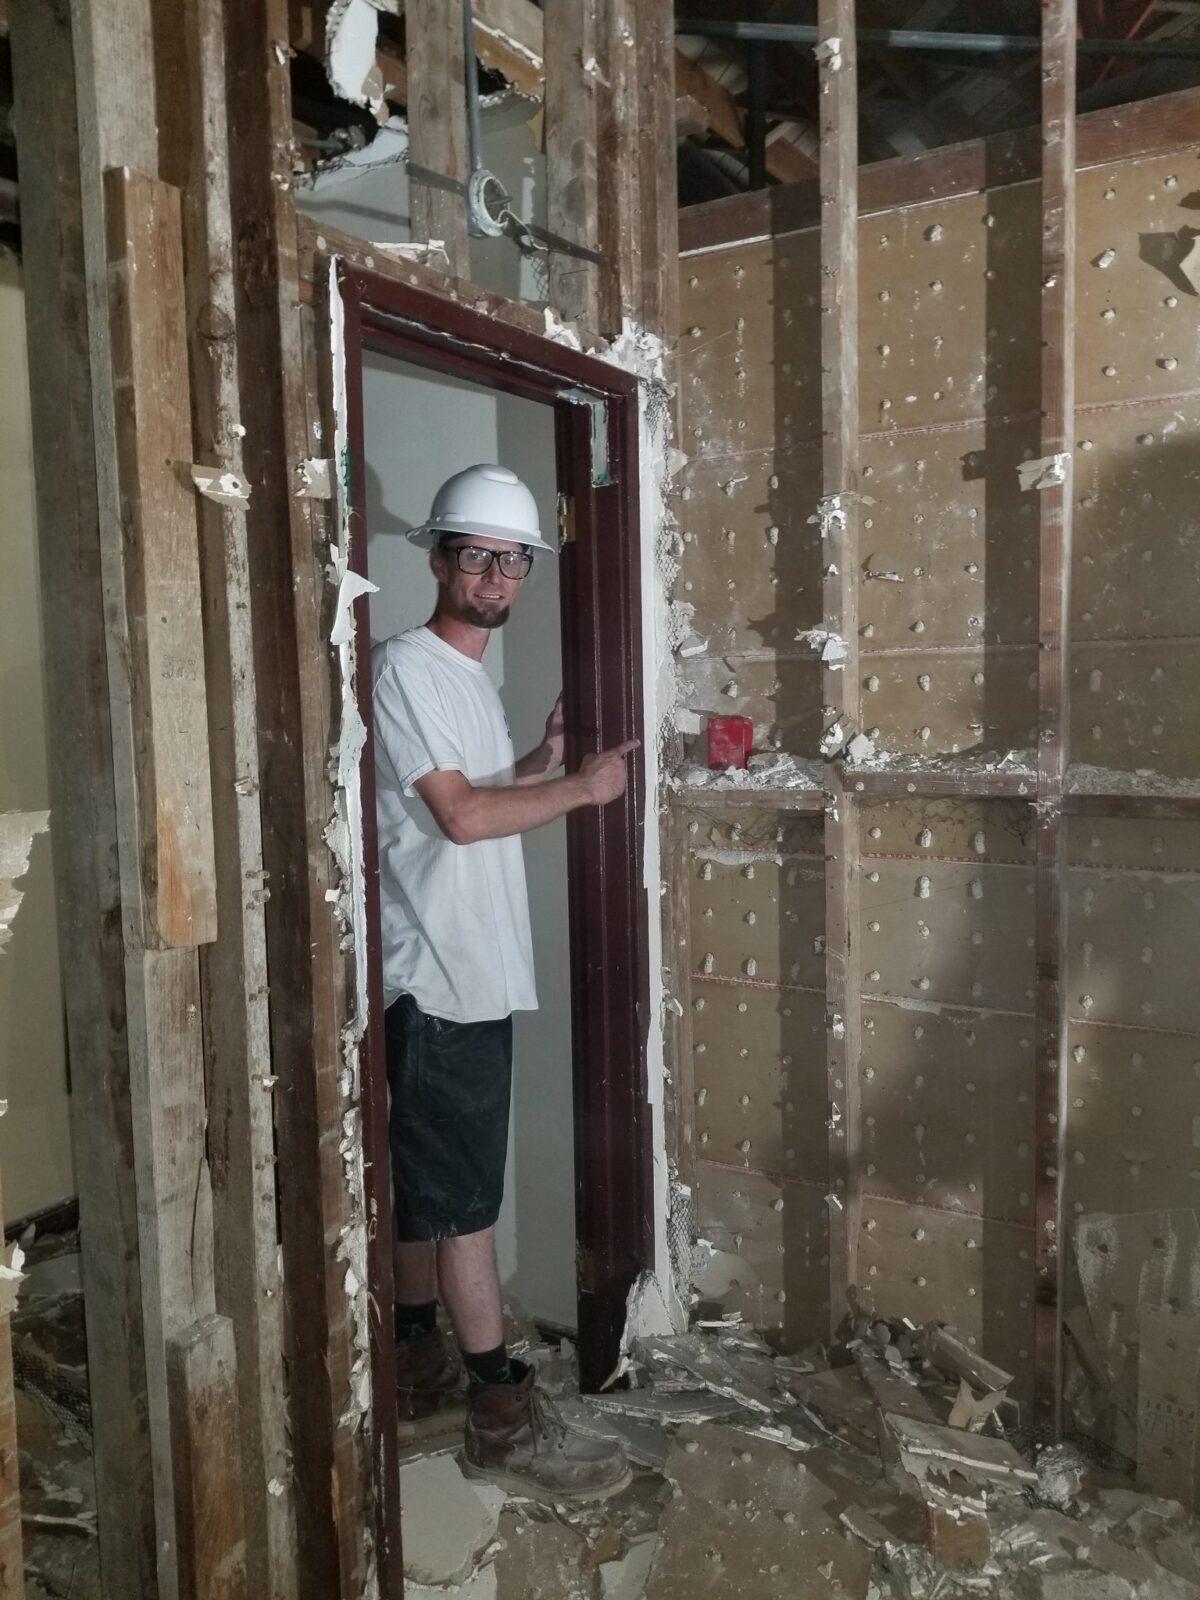 Kris King, the construction crew worker renovating Sunset Theater, who spotted Donna Brown's wallet. (Courtesy of <a href="https://www.facebook.com/LodiSunset/">The Sunset Theater Lodi</a>)